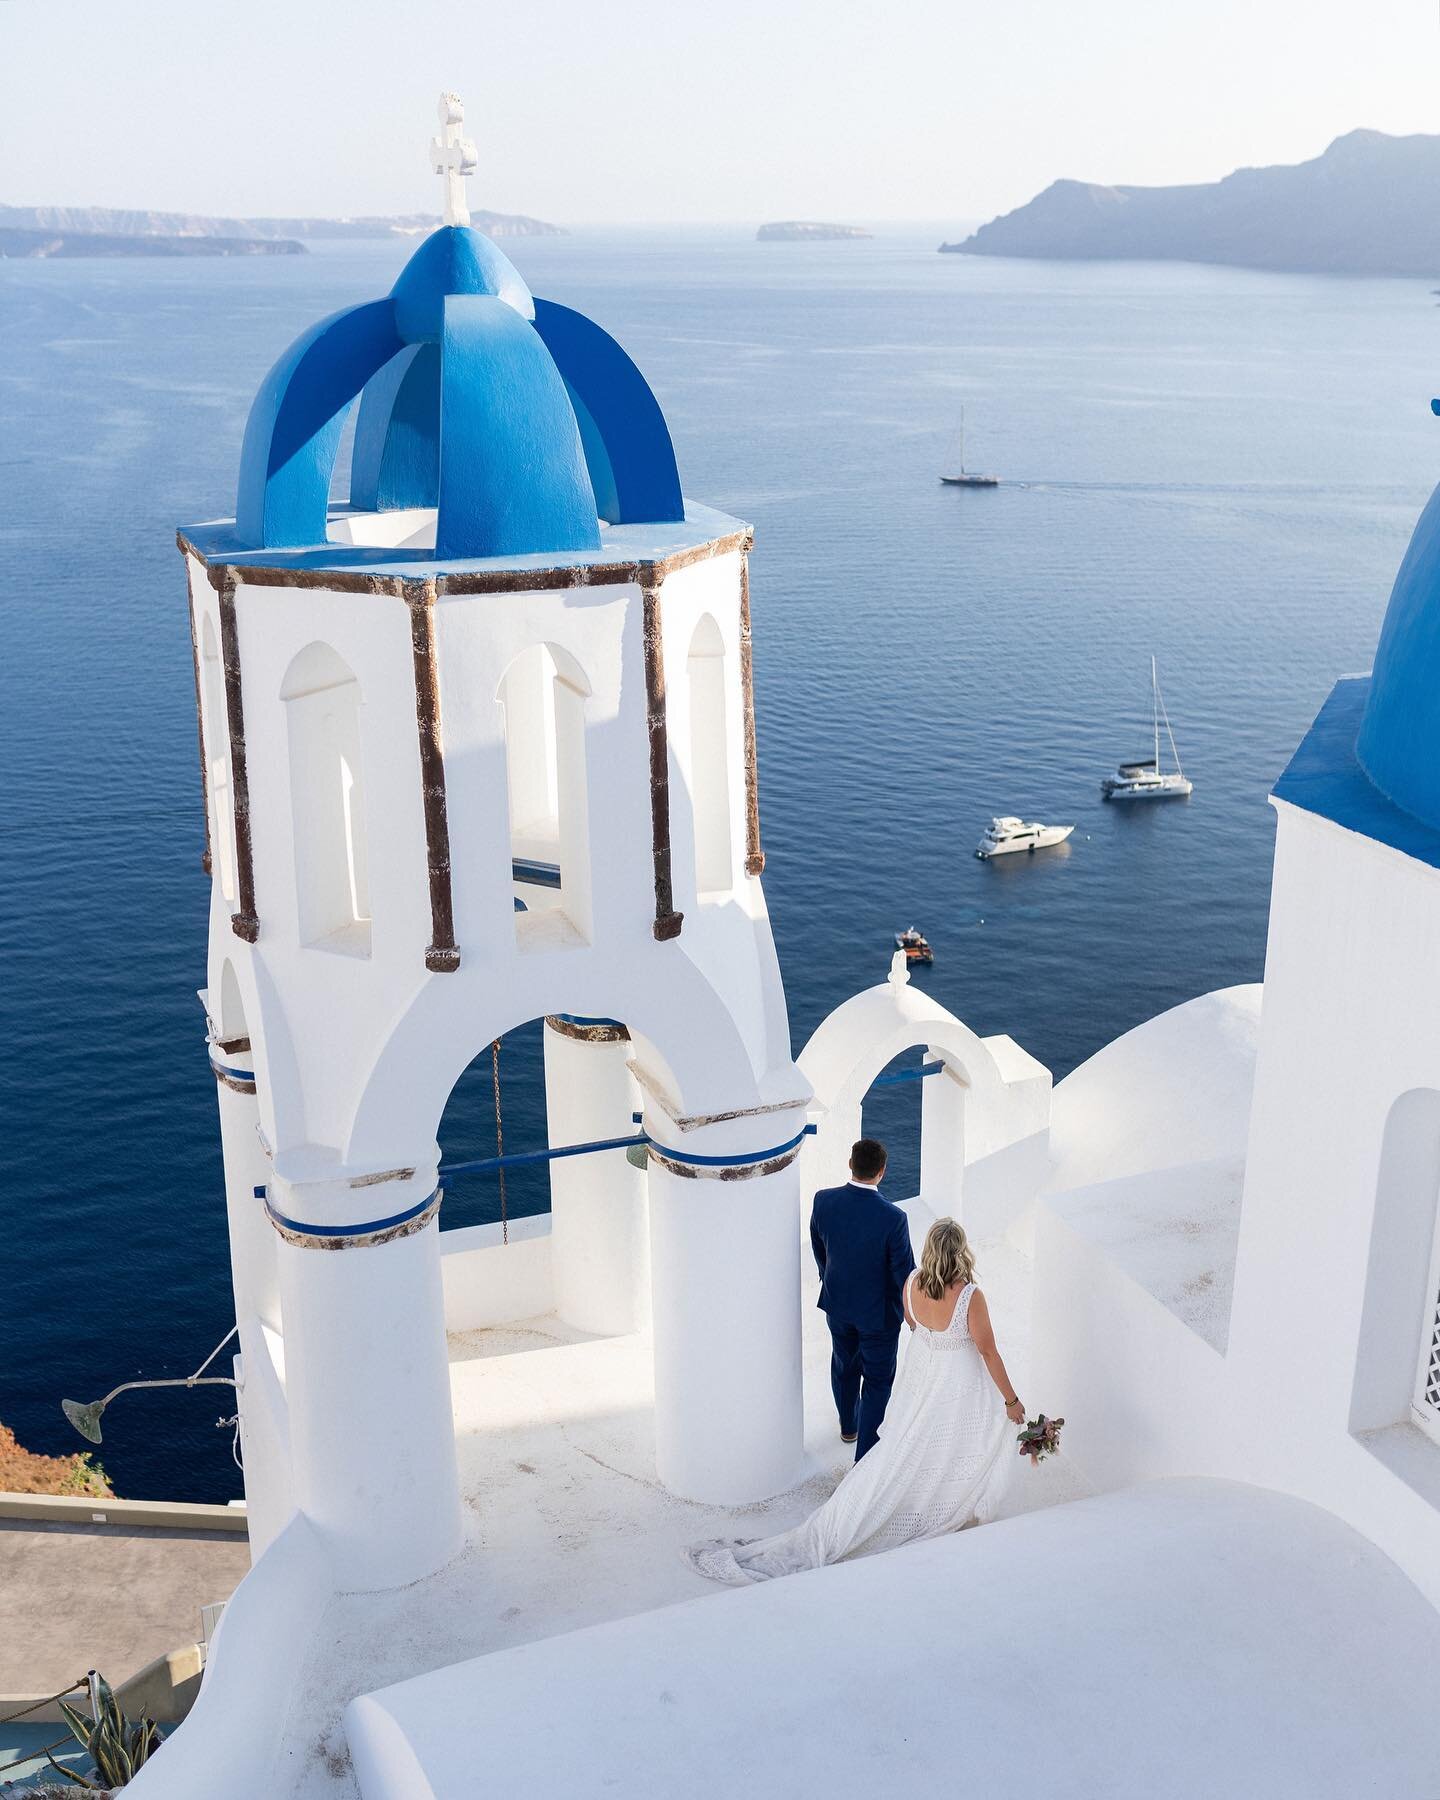 Why you should Elope in Greece

Eloping in Greece can be a wonderful and romantic experience for a variety of reasons:
1. Stunning Scenery: Greece has some of the most beautiful scenery in the world, with picturesque islands, crystal-clear waters, an